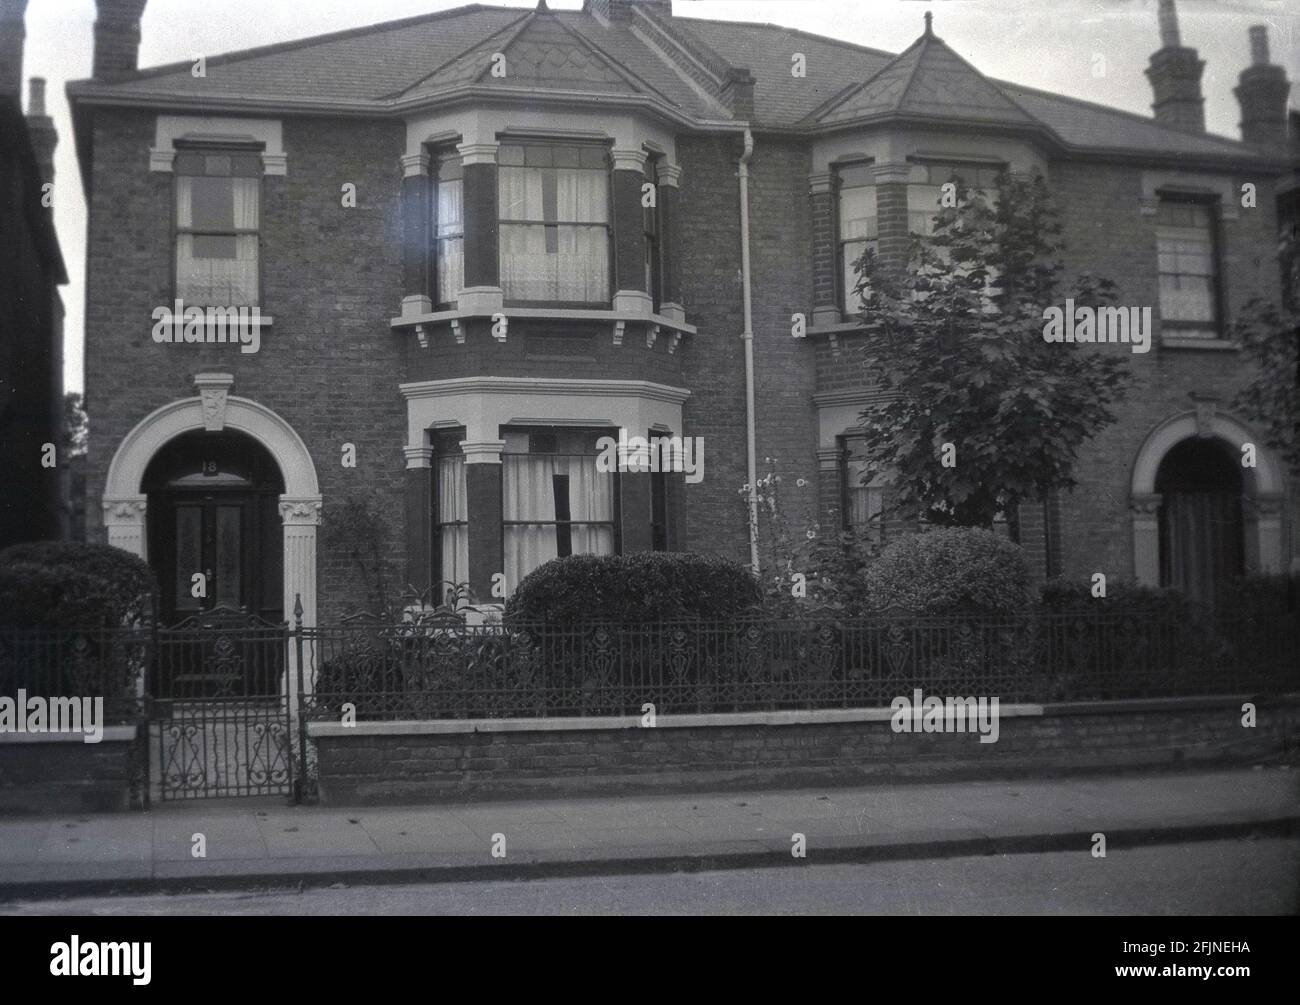 1940s, historical, exterior view of two semi-detached Victorin houses at Seven Kings, Ilford, Essex, England, UK. These large two-storey properties were built around 1850 and had ornate, decorative stone work around the windows and entrance that set them apart from other victorian semi's. Stock Photo